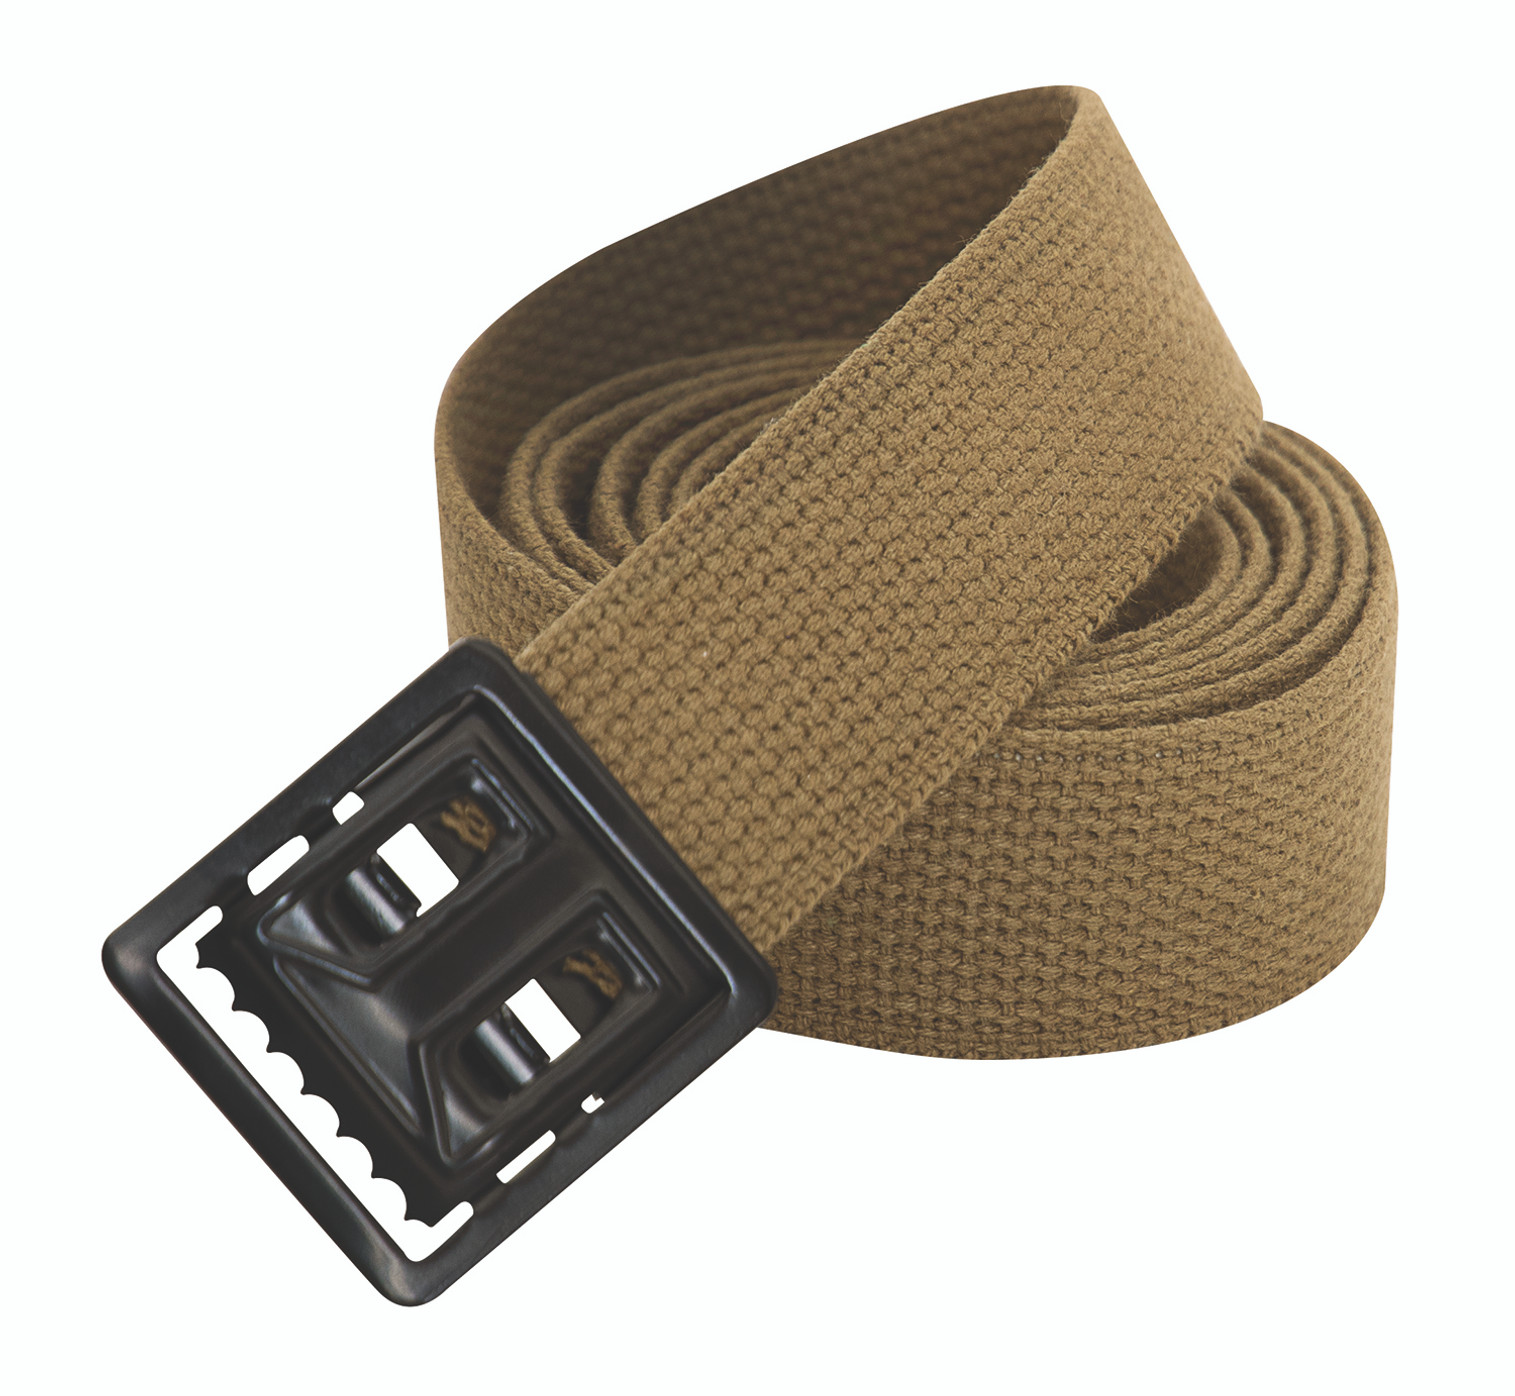 Rothco Military Web Belts With Open Face Buckle - 54" - Coyote Brown/Black Buckle